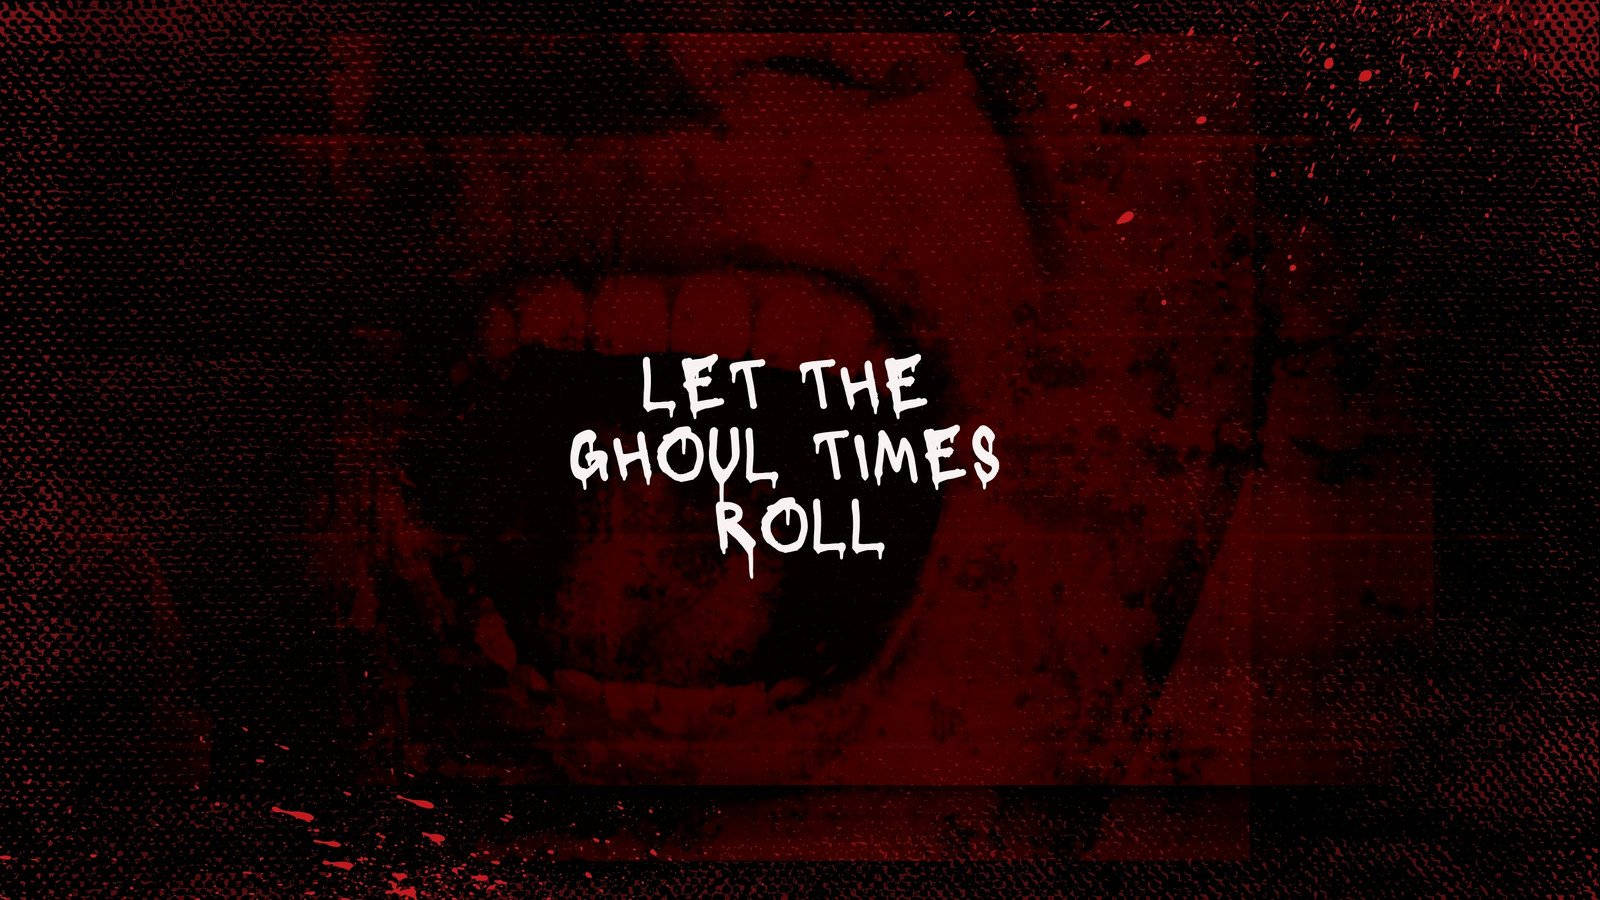 Red Halloween Grunge Ghoul Times Wallpaper